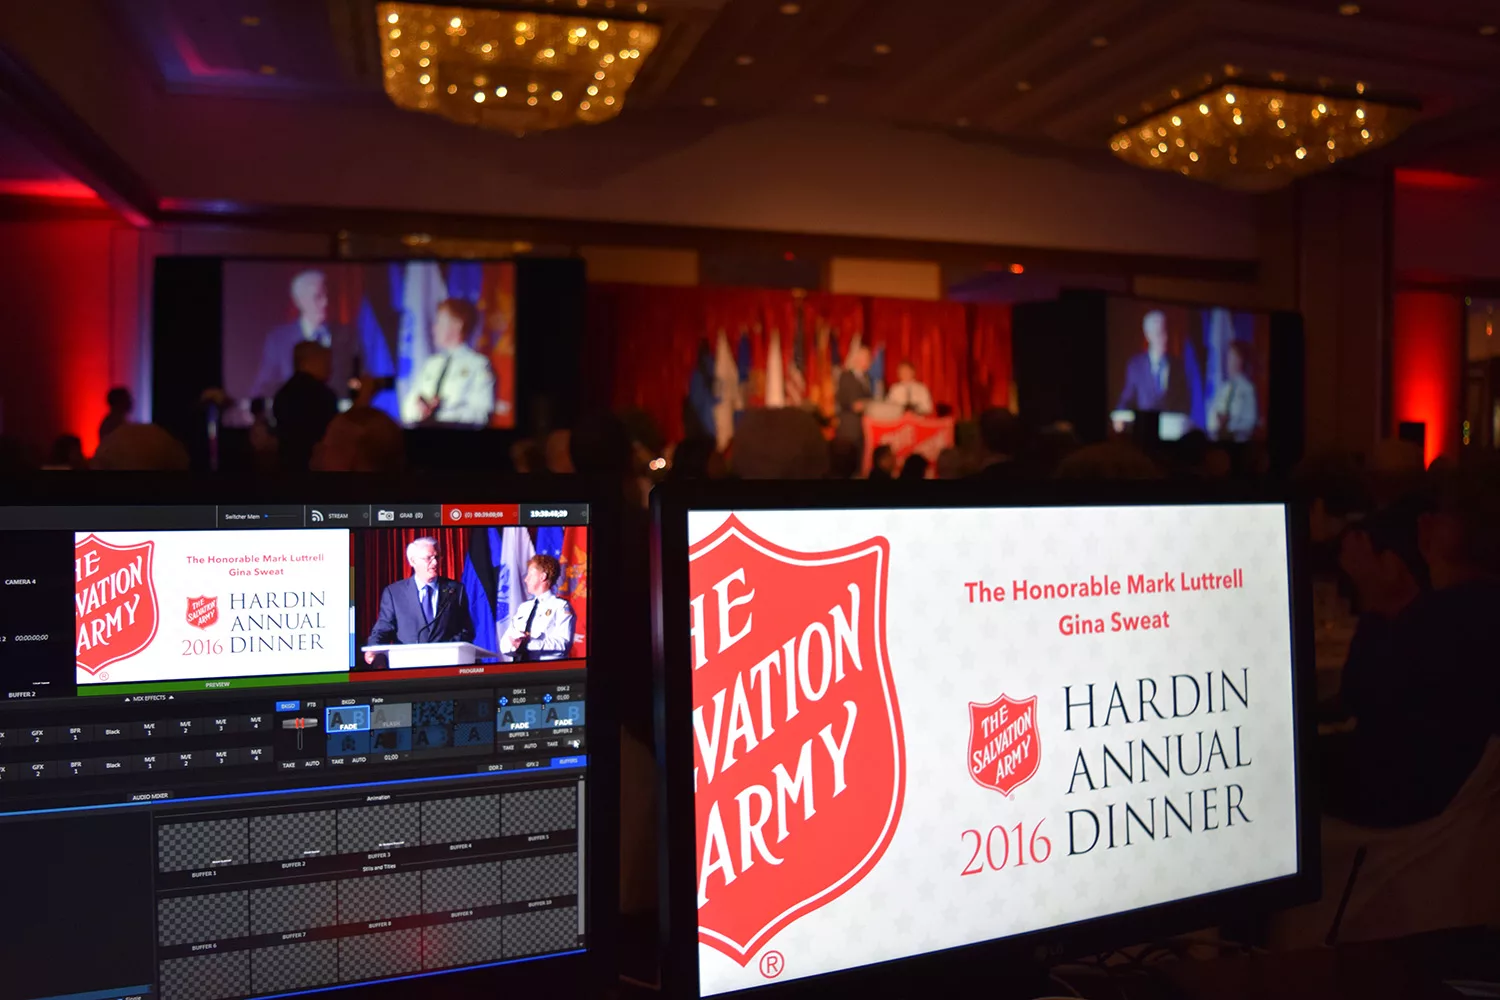 Image taken at the Salvation Army 2016 Hardin Annual Dinner, concentrating on the computer screens in the foreground. The screens display the NewTek Tricaster software, illustrating the live video production process in action. This snapshot provides a glimpse into the high-quality live video production services provided by MCC during significant events.